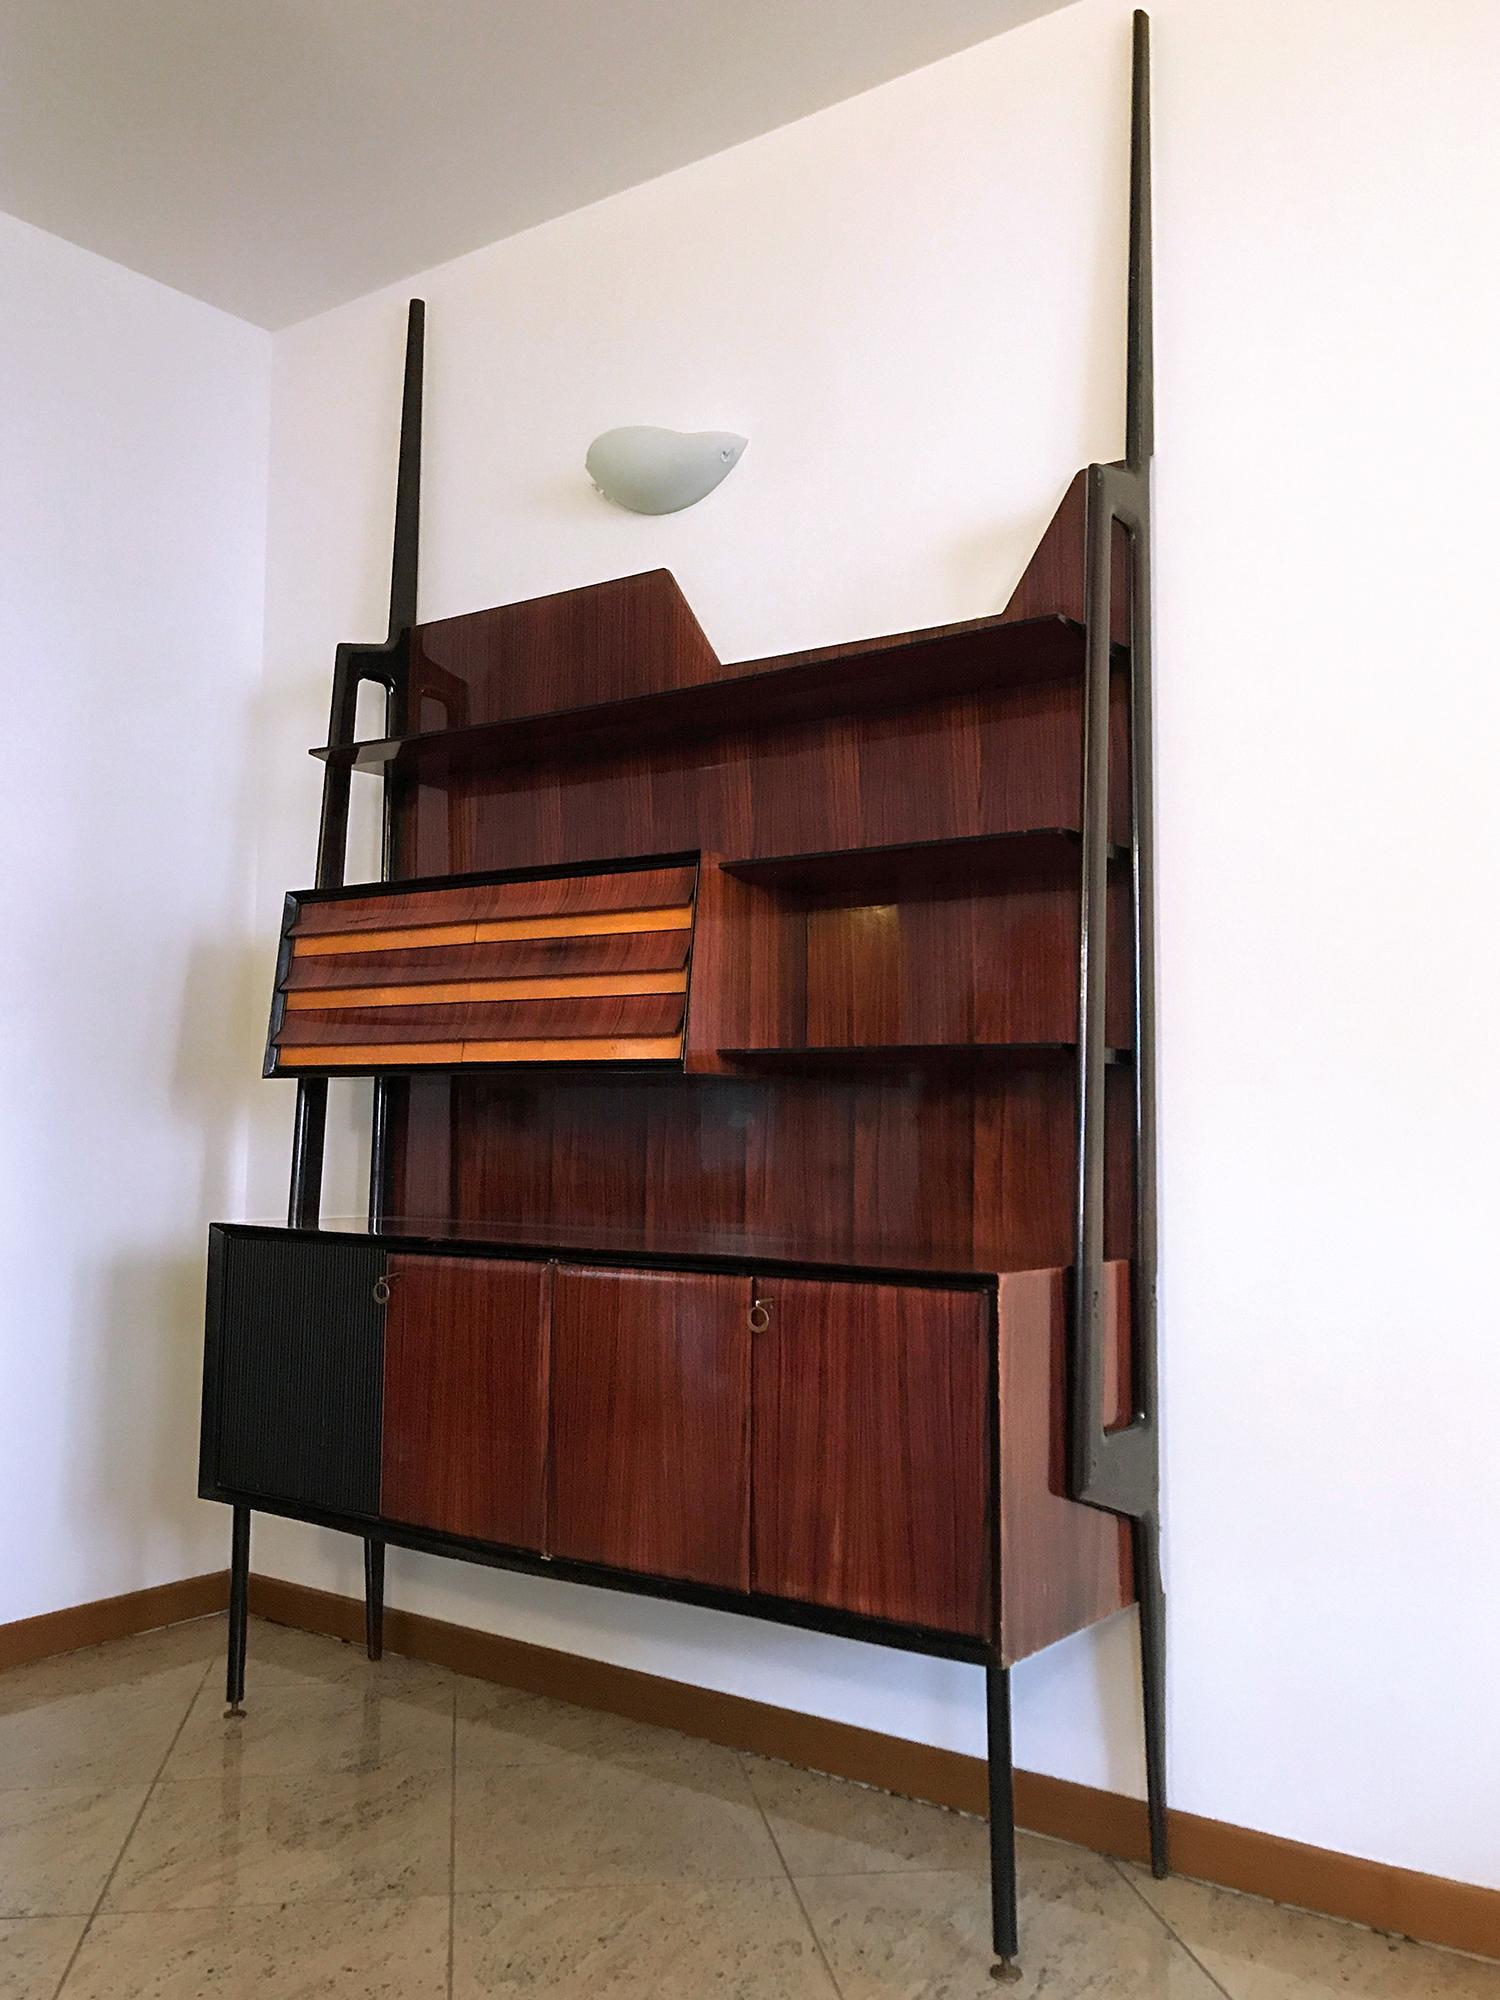 Painted Italian Midcentury Self-Standing Wall Unit or Bookcase by Vittorio Dassi, 1950s